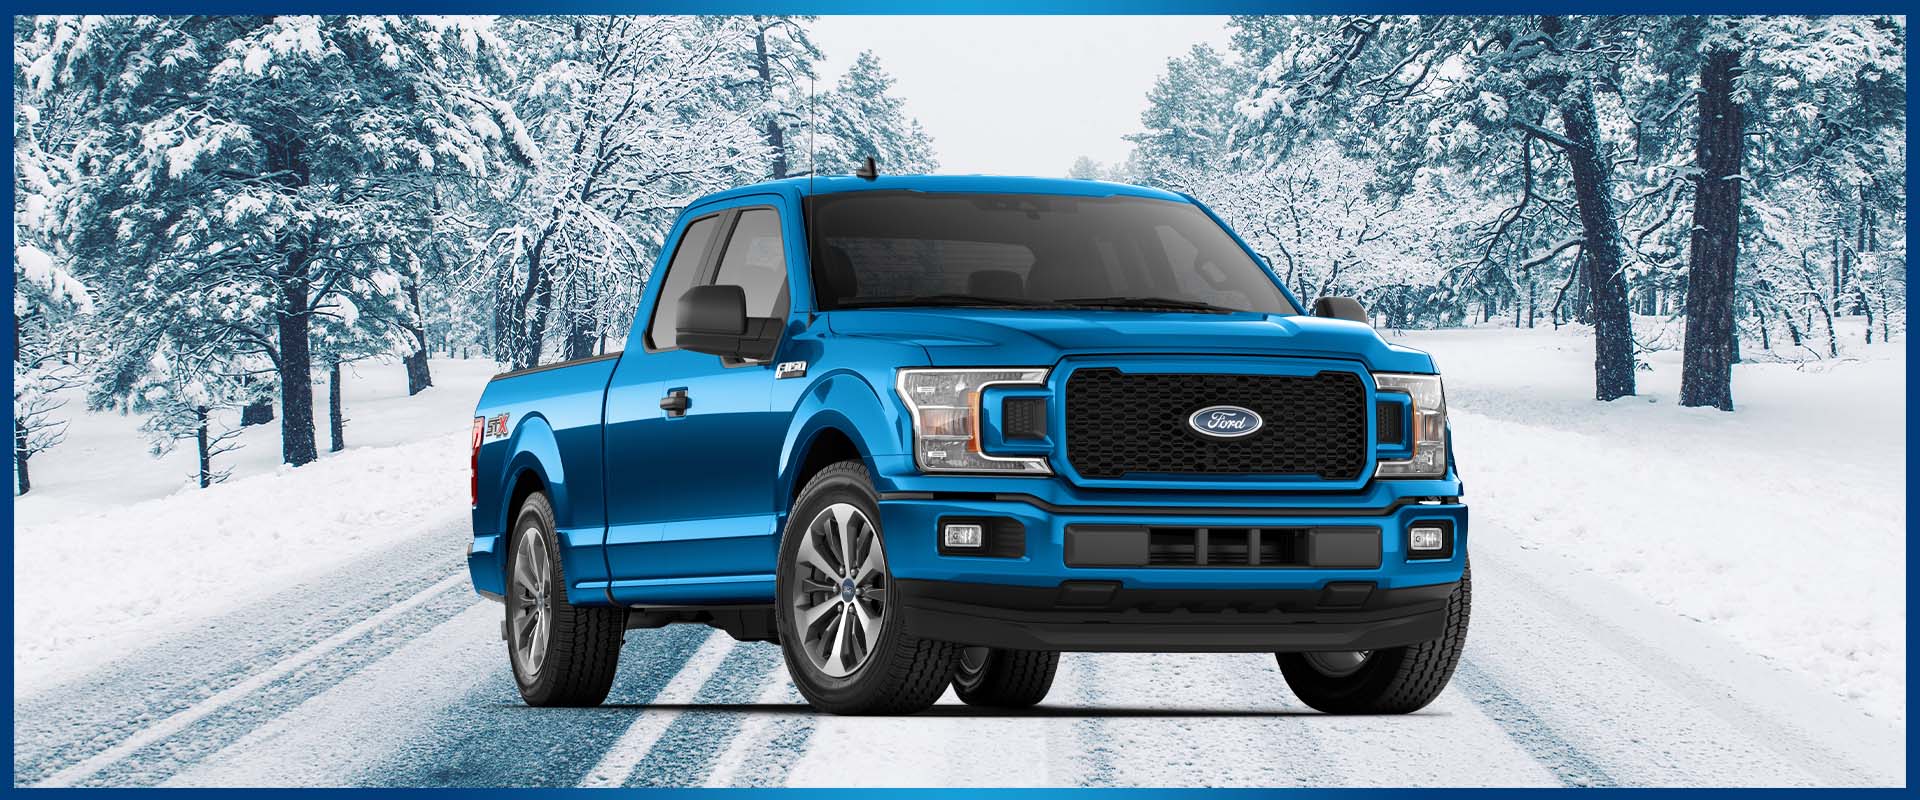 Ford winter care